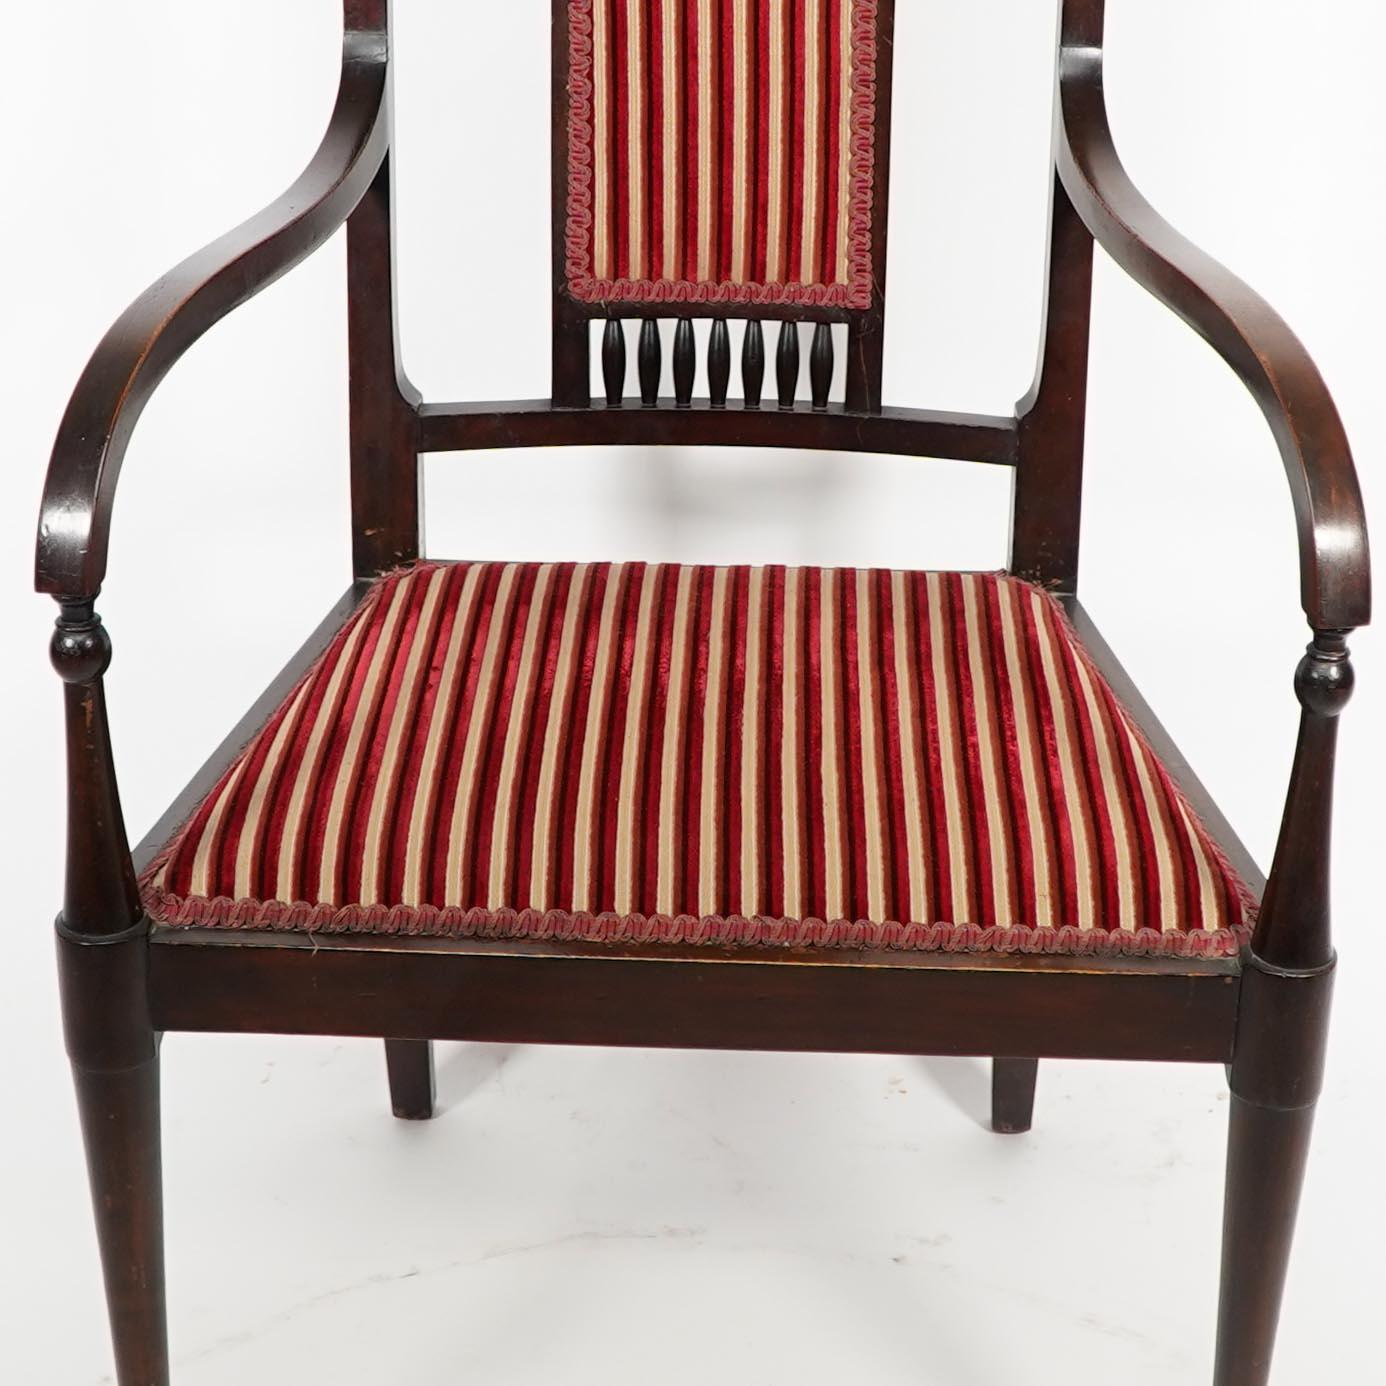 Early 20th Century George Walton for John Rowntree & Kate Cranston tea rooms Arts & Crafts Armchair For Sale